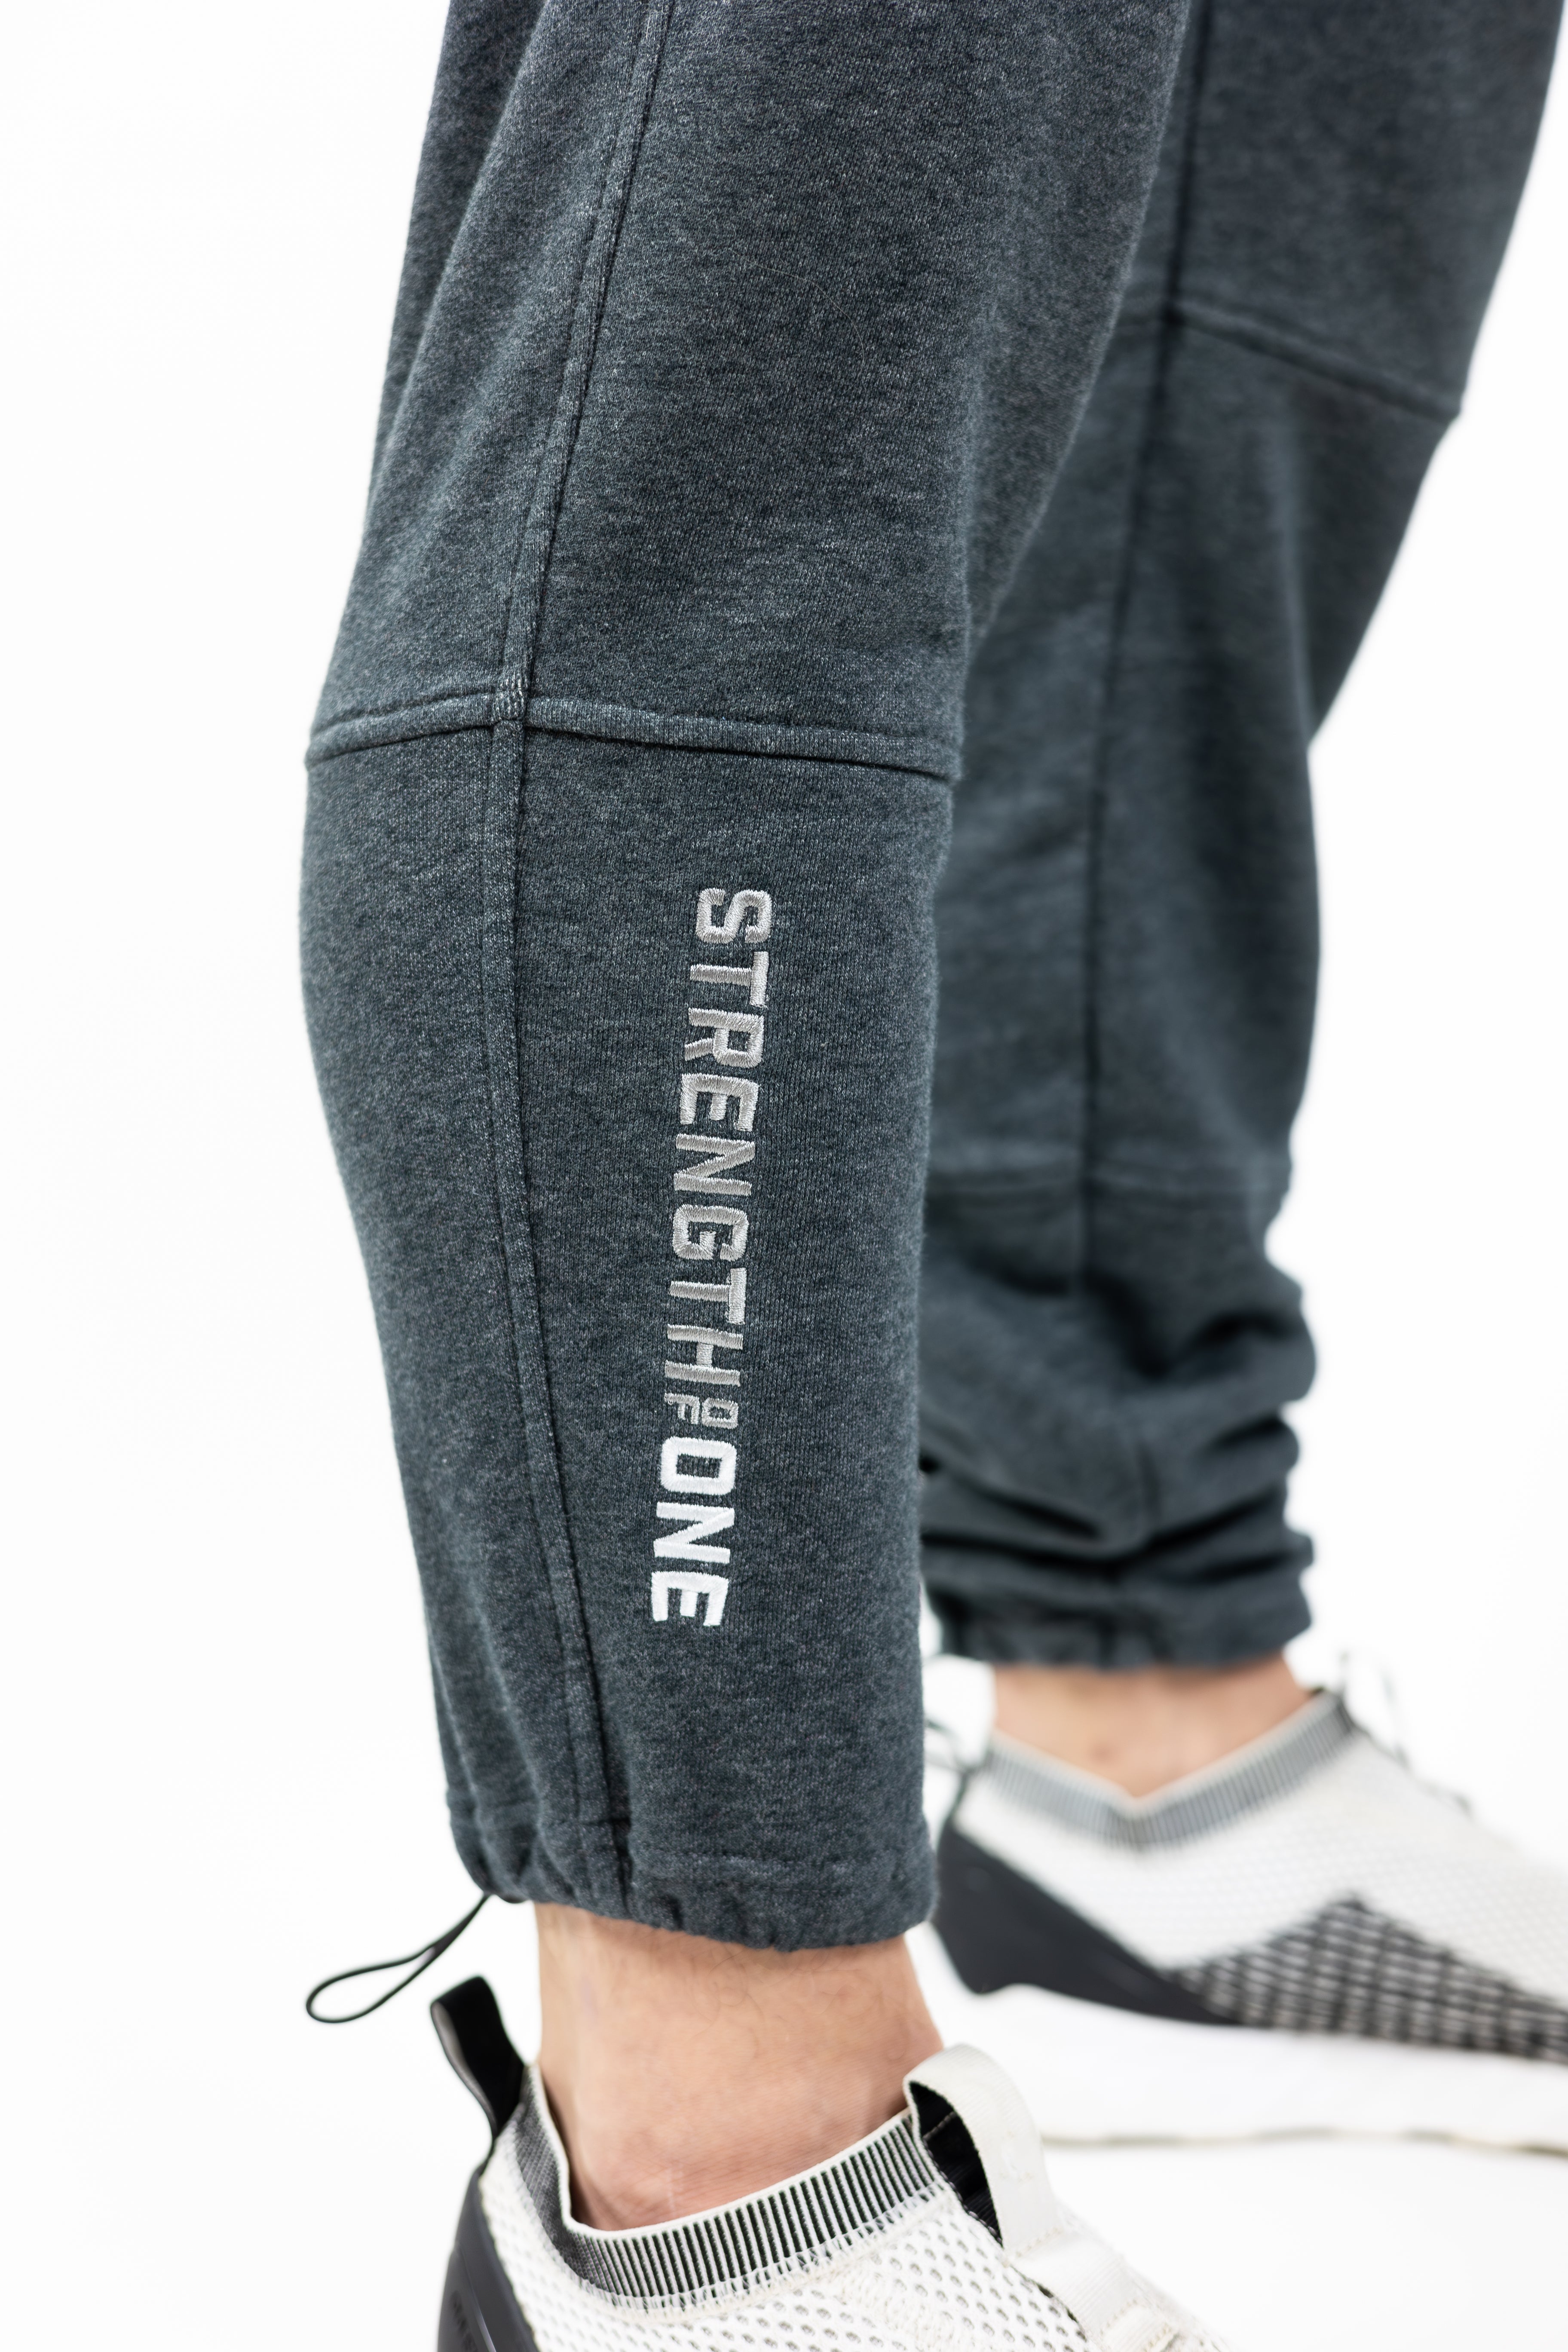 man modeling gray sweatpants with embroidered Strength of One logo vertical down left lower leg